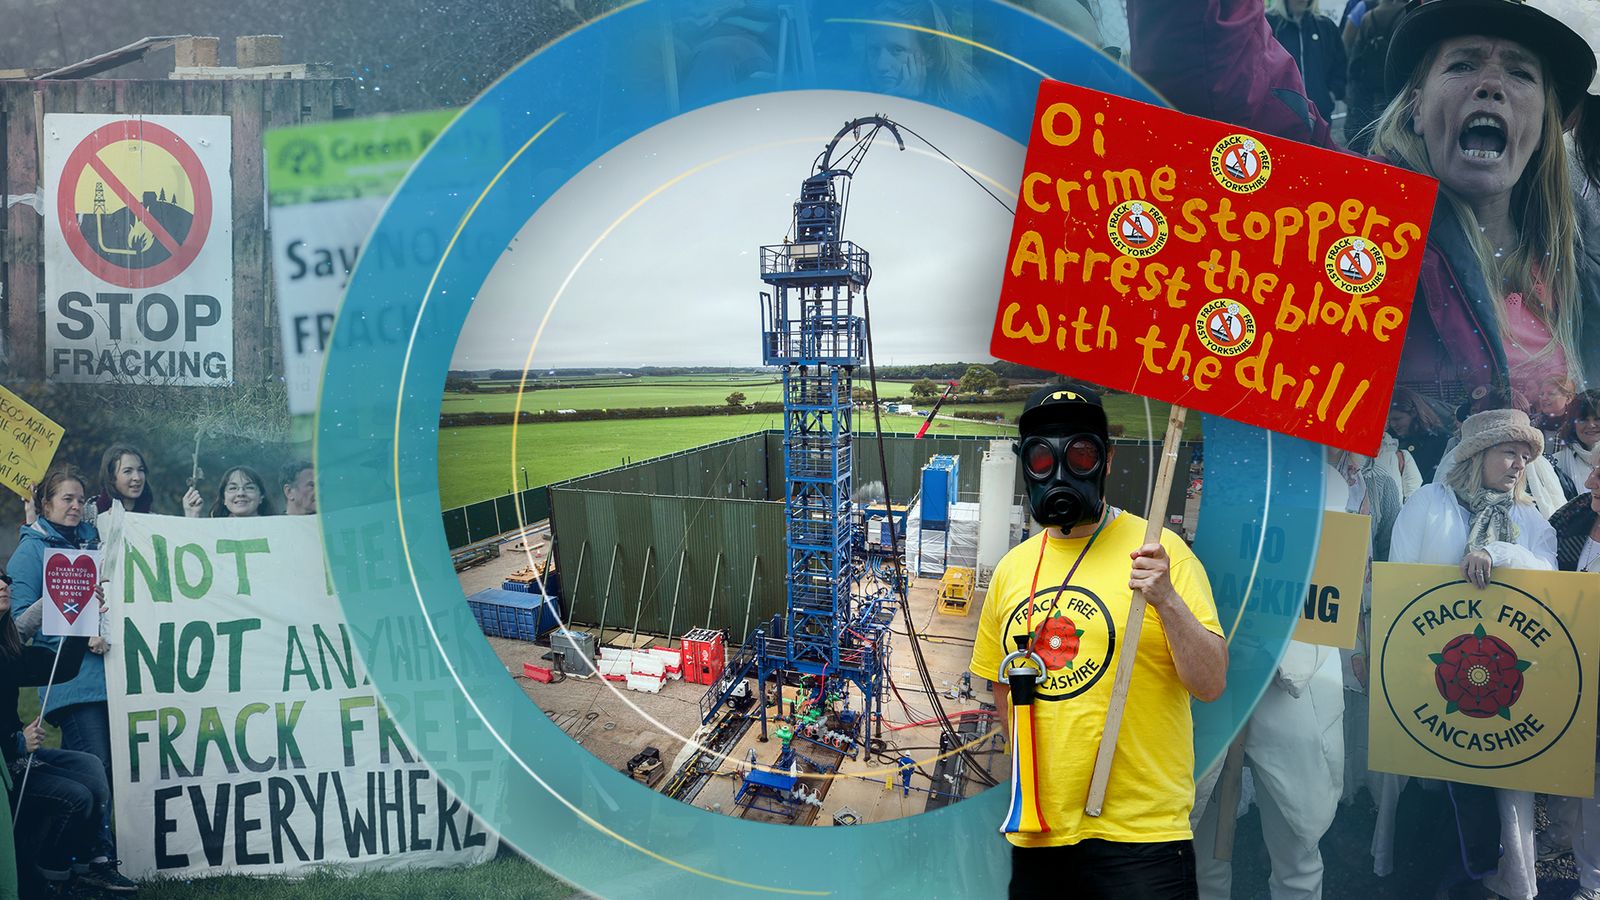 Over a quarter of local authorities in England are covered by oil and gas licences - could fracking come to your area?